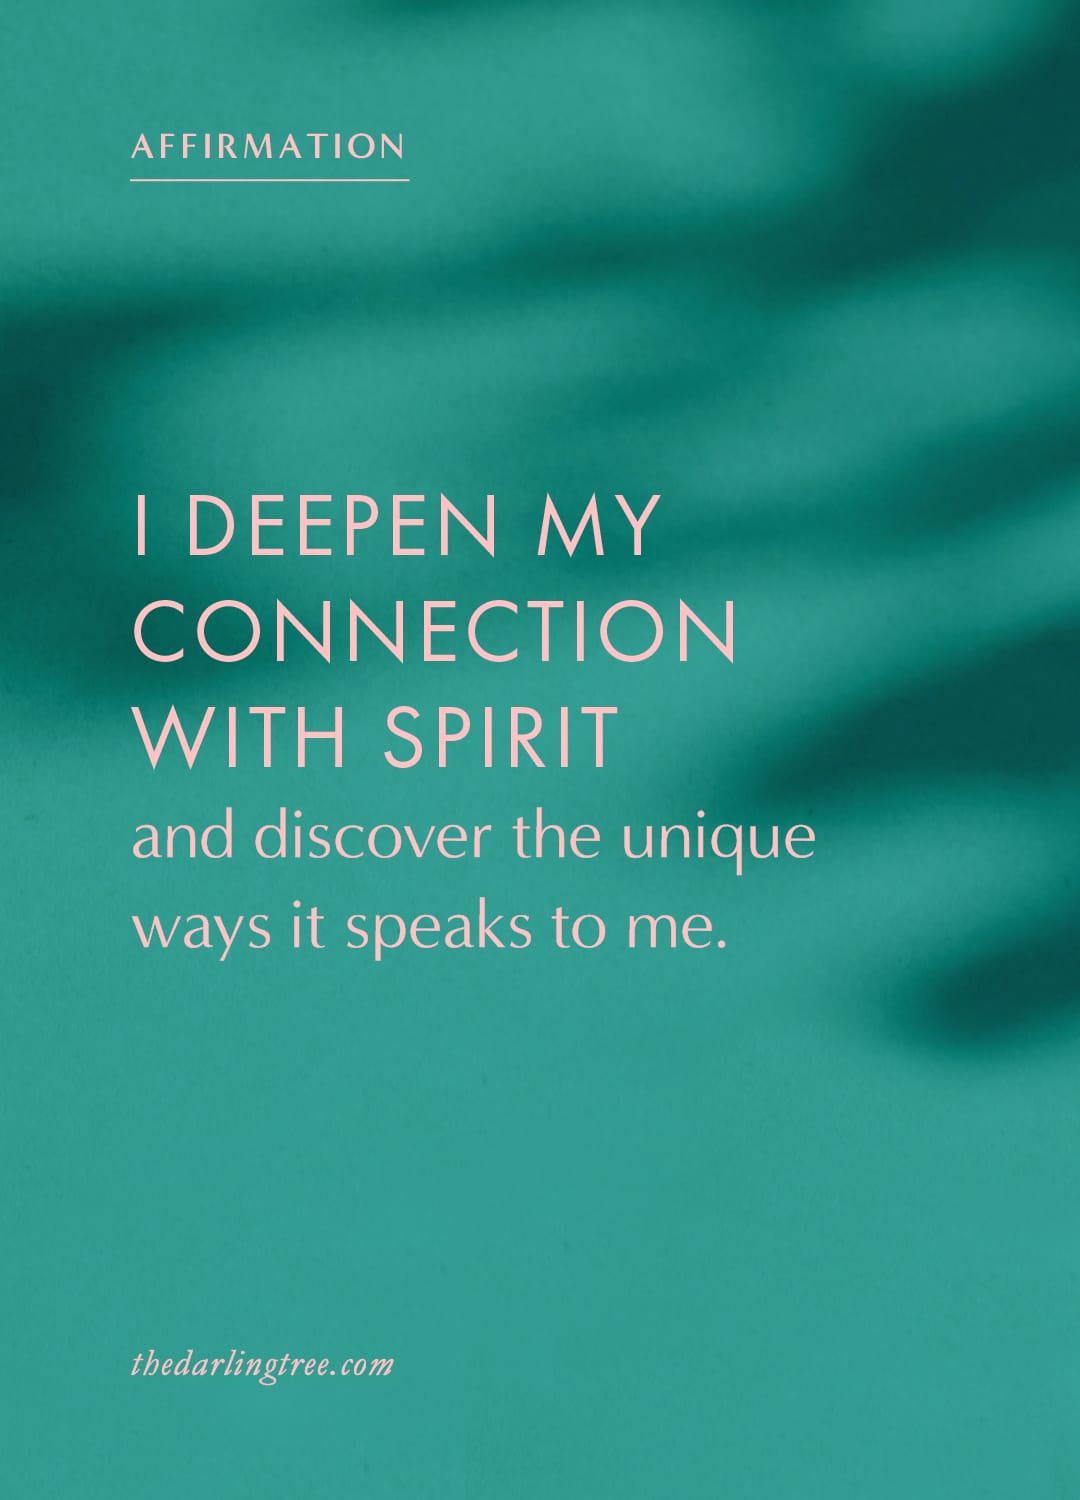 Affirmation: I deepen my connection with spirit